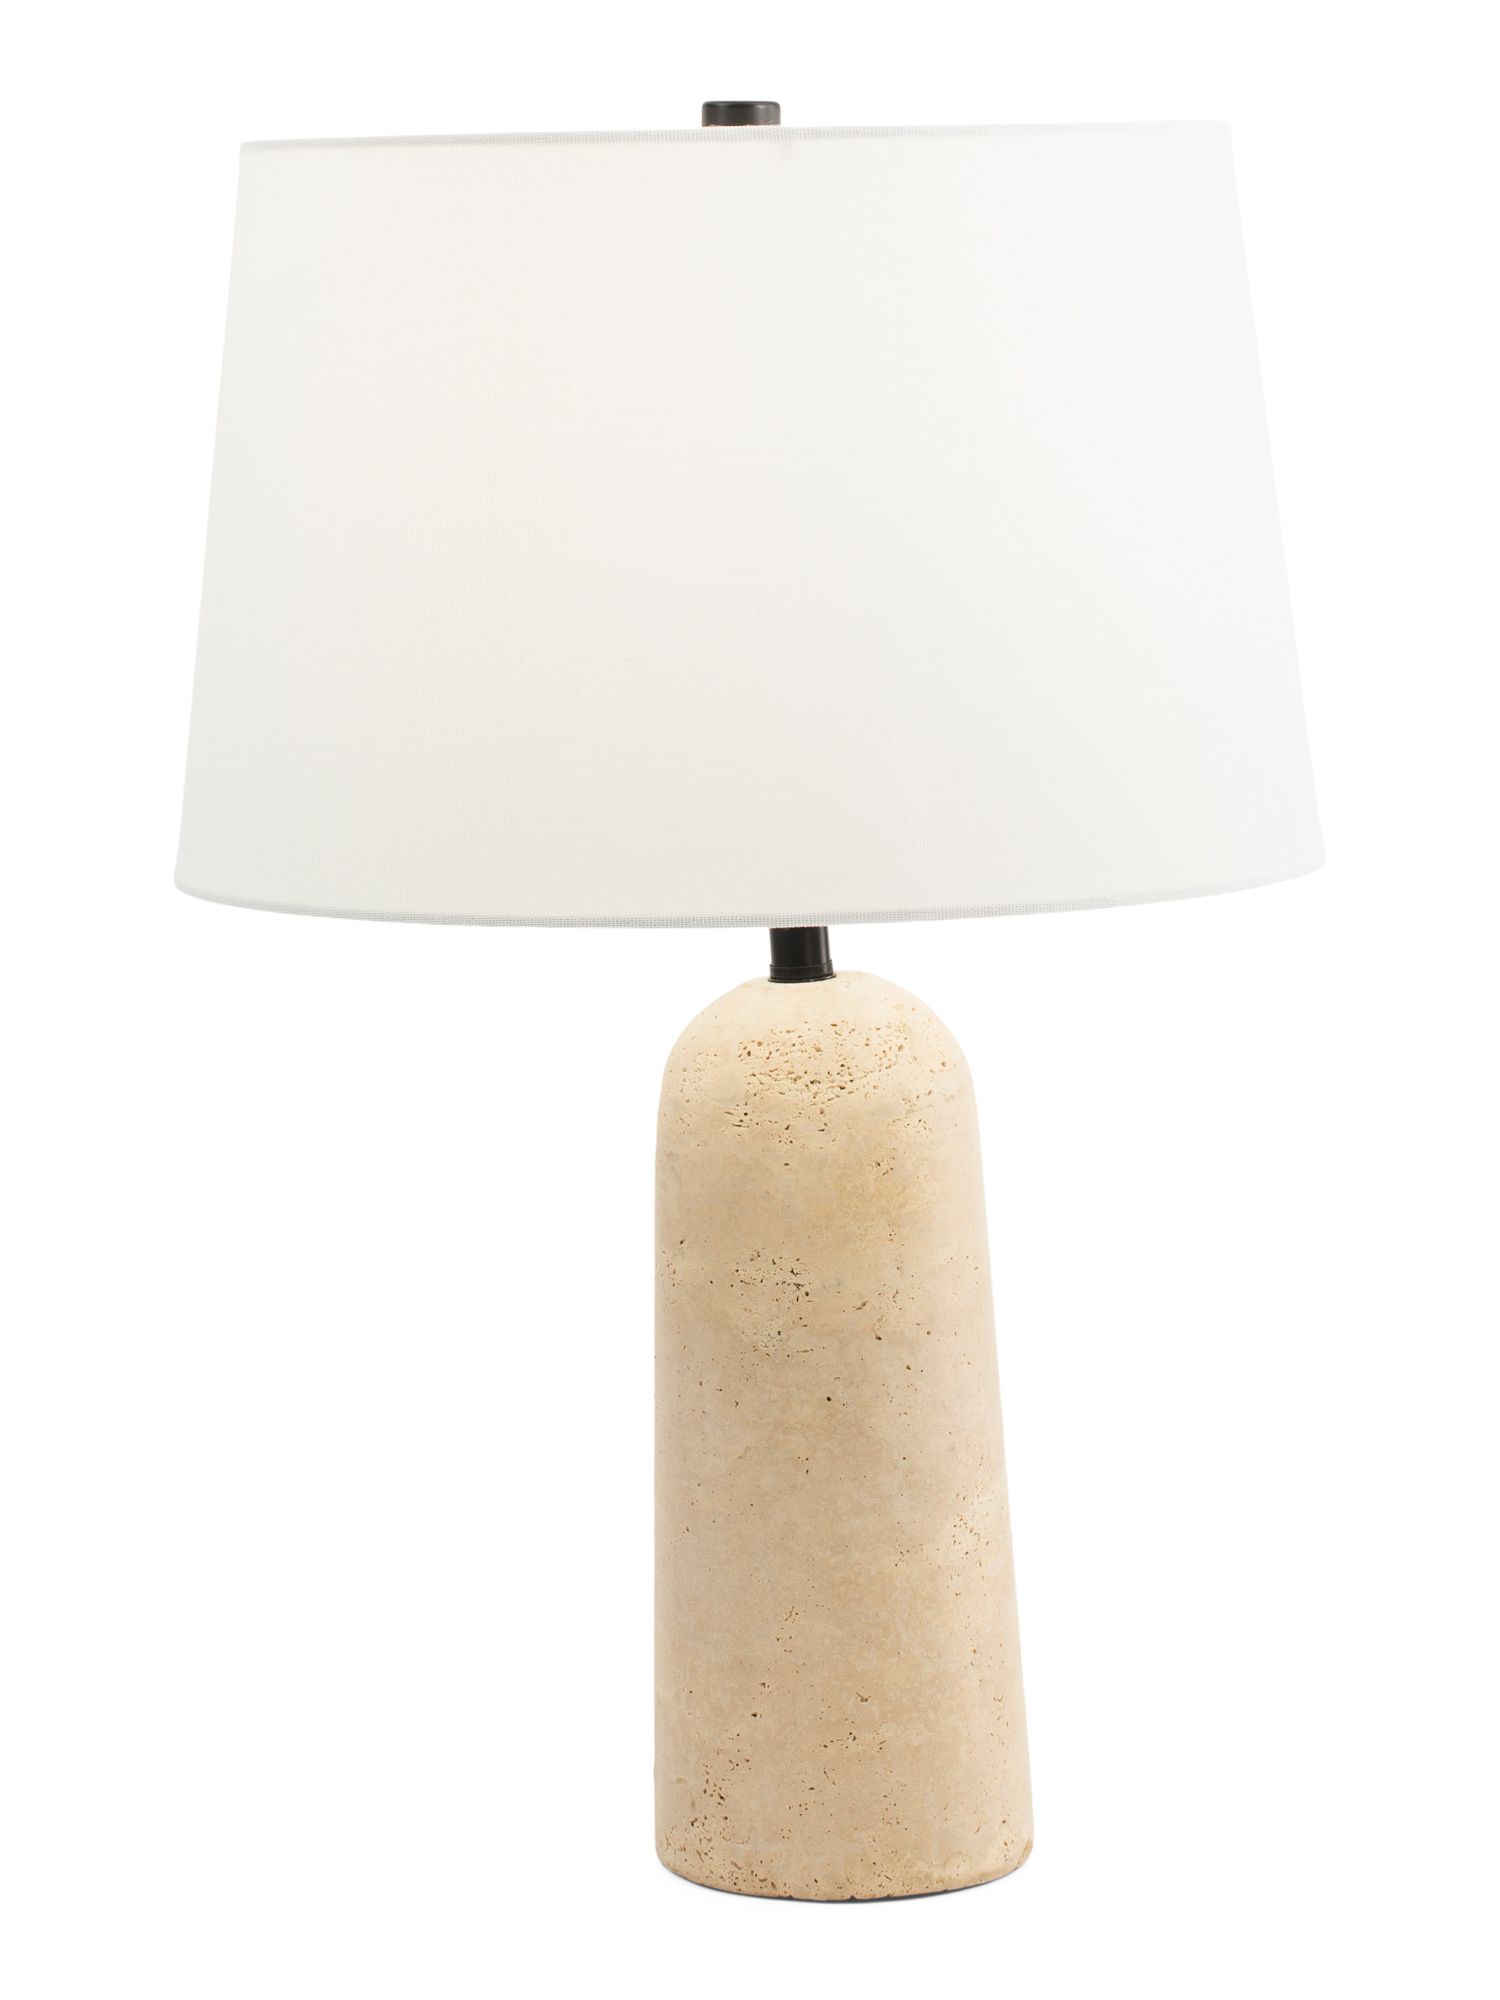 22in Round Travertine Agate Table Lamp | Marshalls